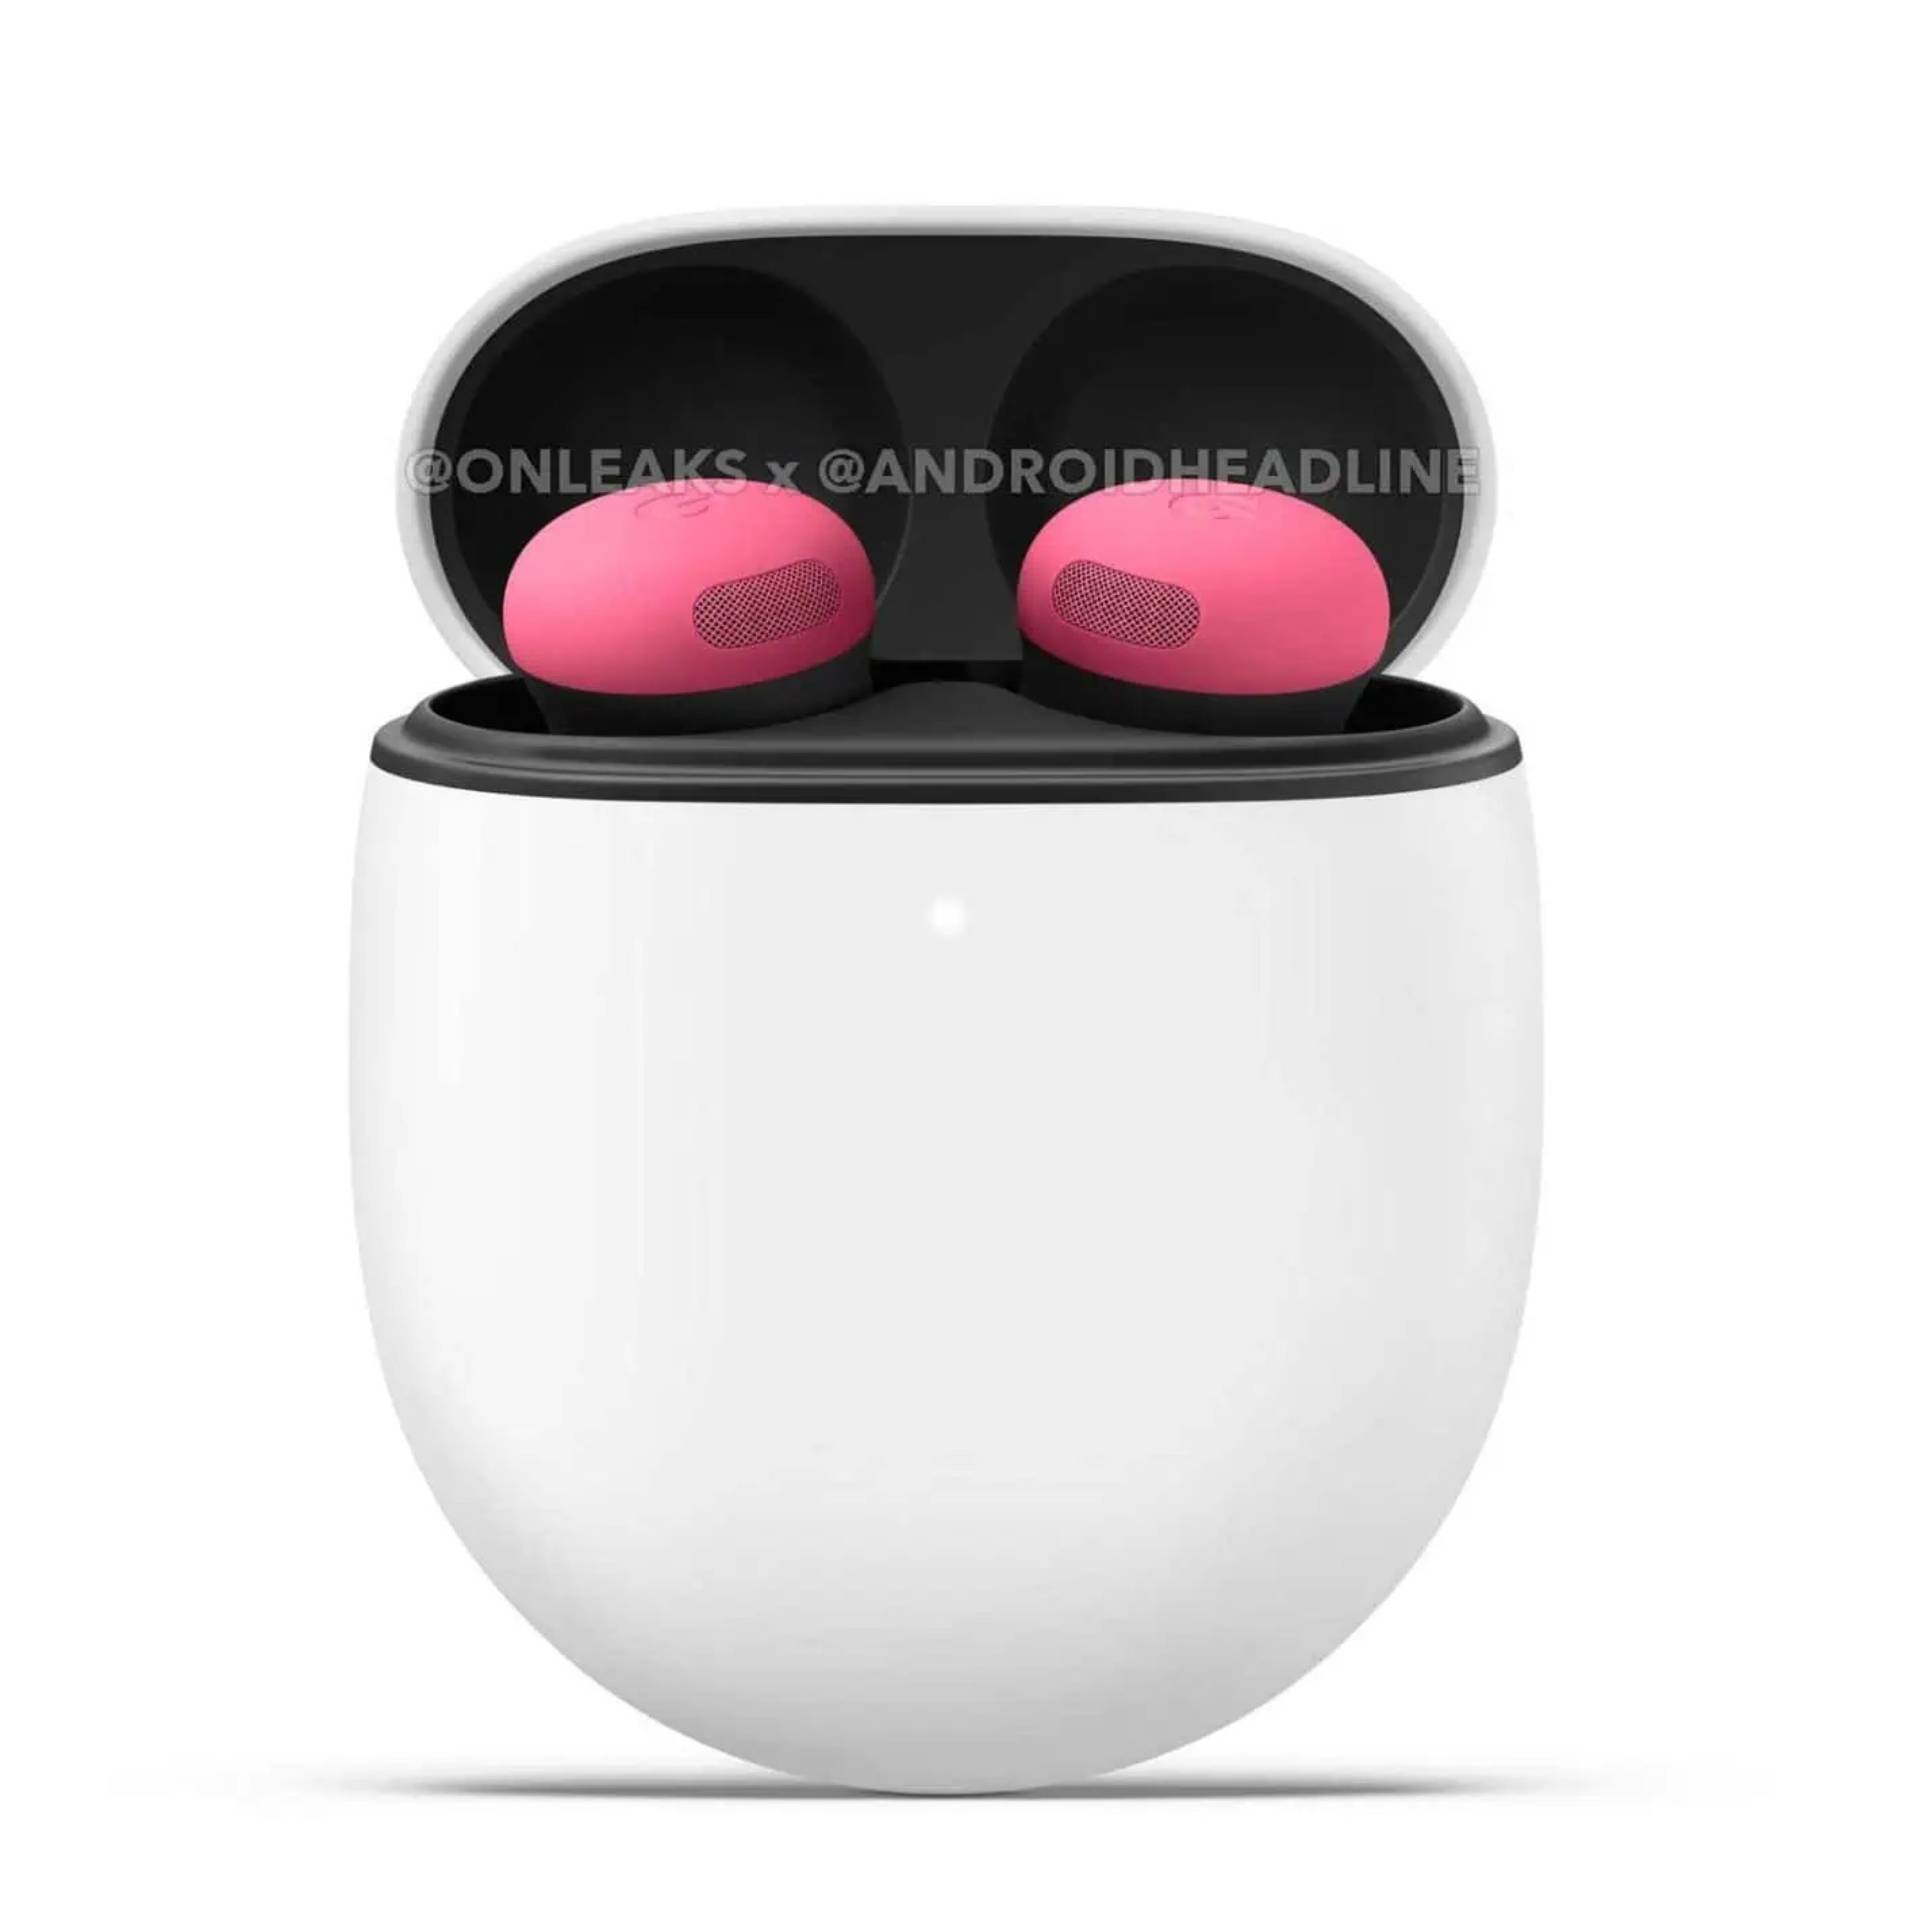 Leaked render of the pink Pixel Buds Pro 2 on white background.